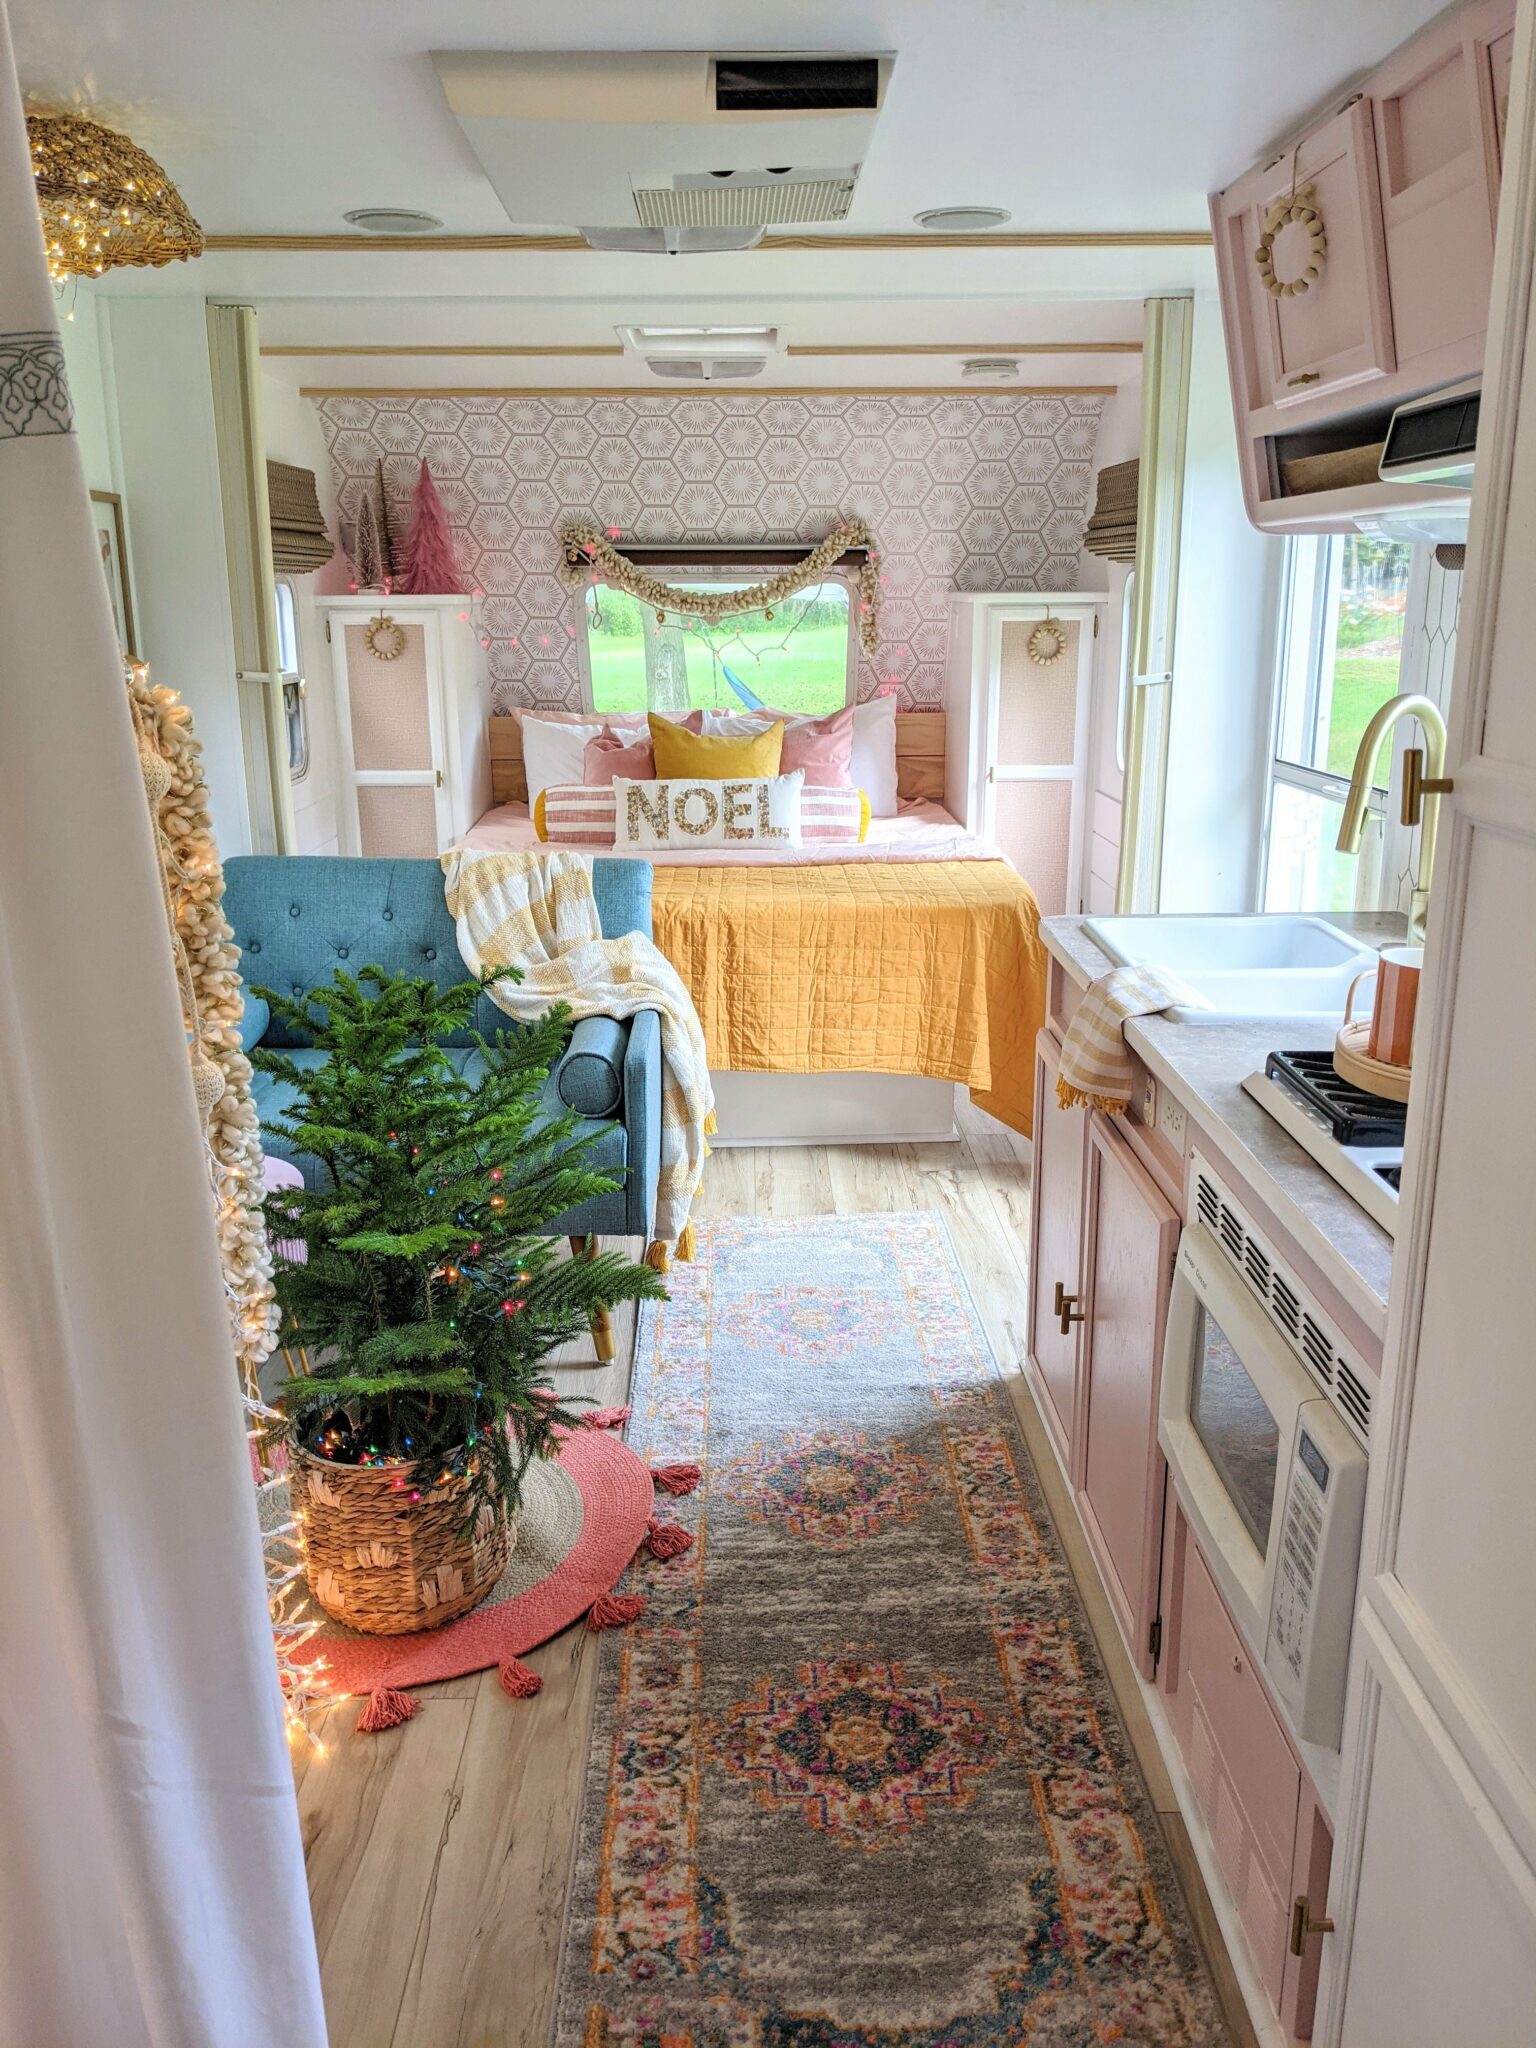 Colorful and Fun Christmas Decorations in the Renovated Camper All Things with Purpose Sarah Lemp 1